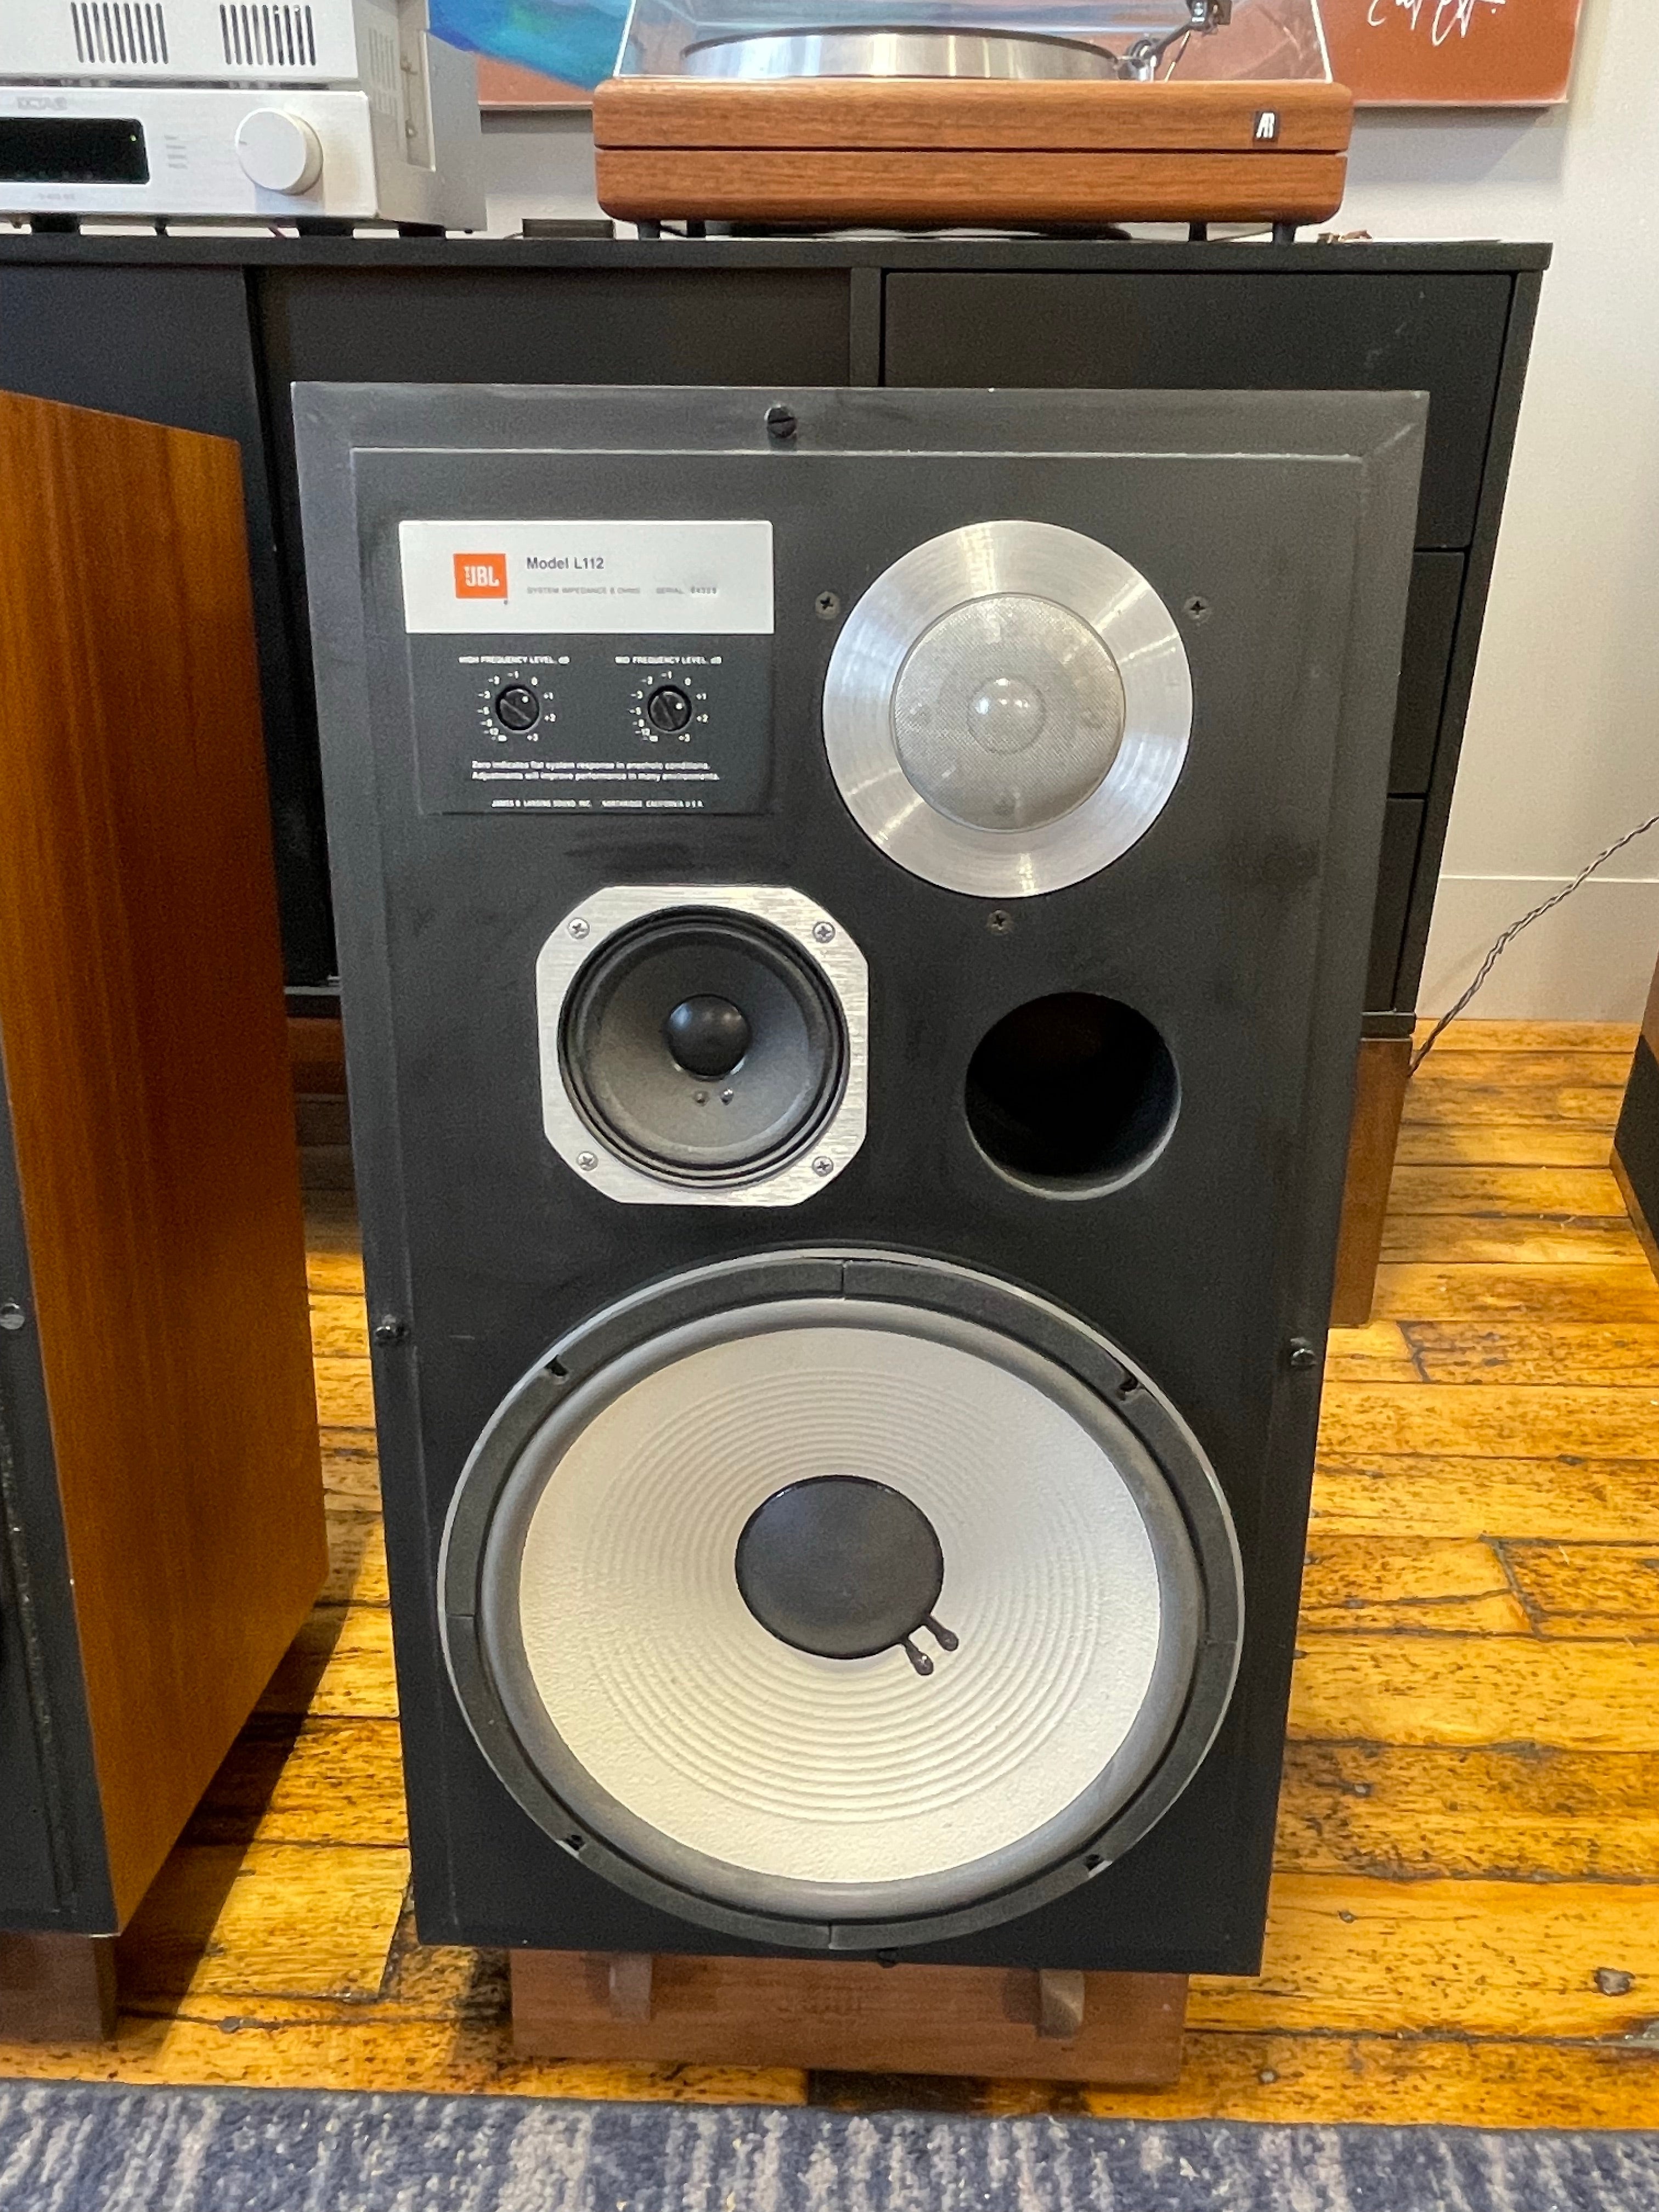 JBL L112 - "The Ones You've Been Waiting For" - SOLD